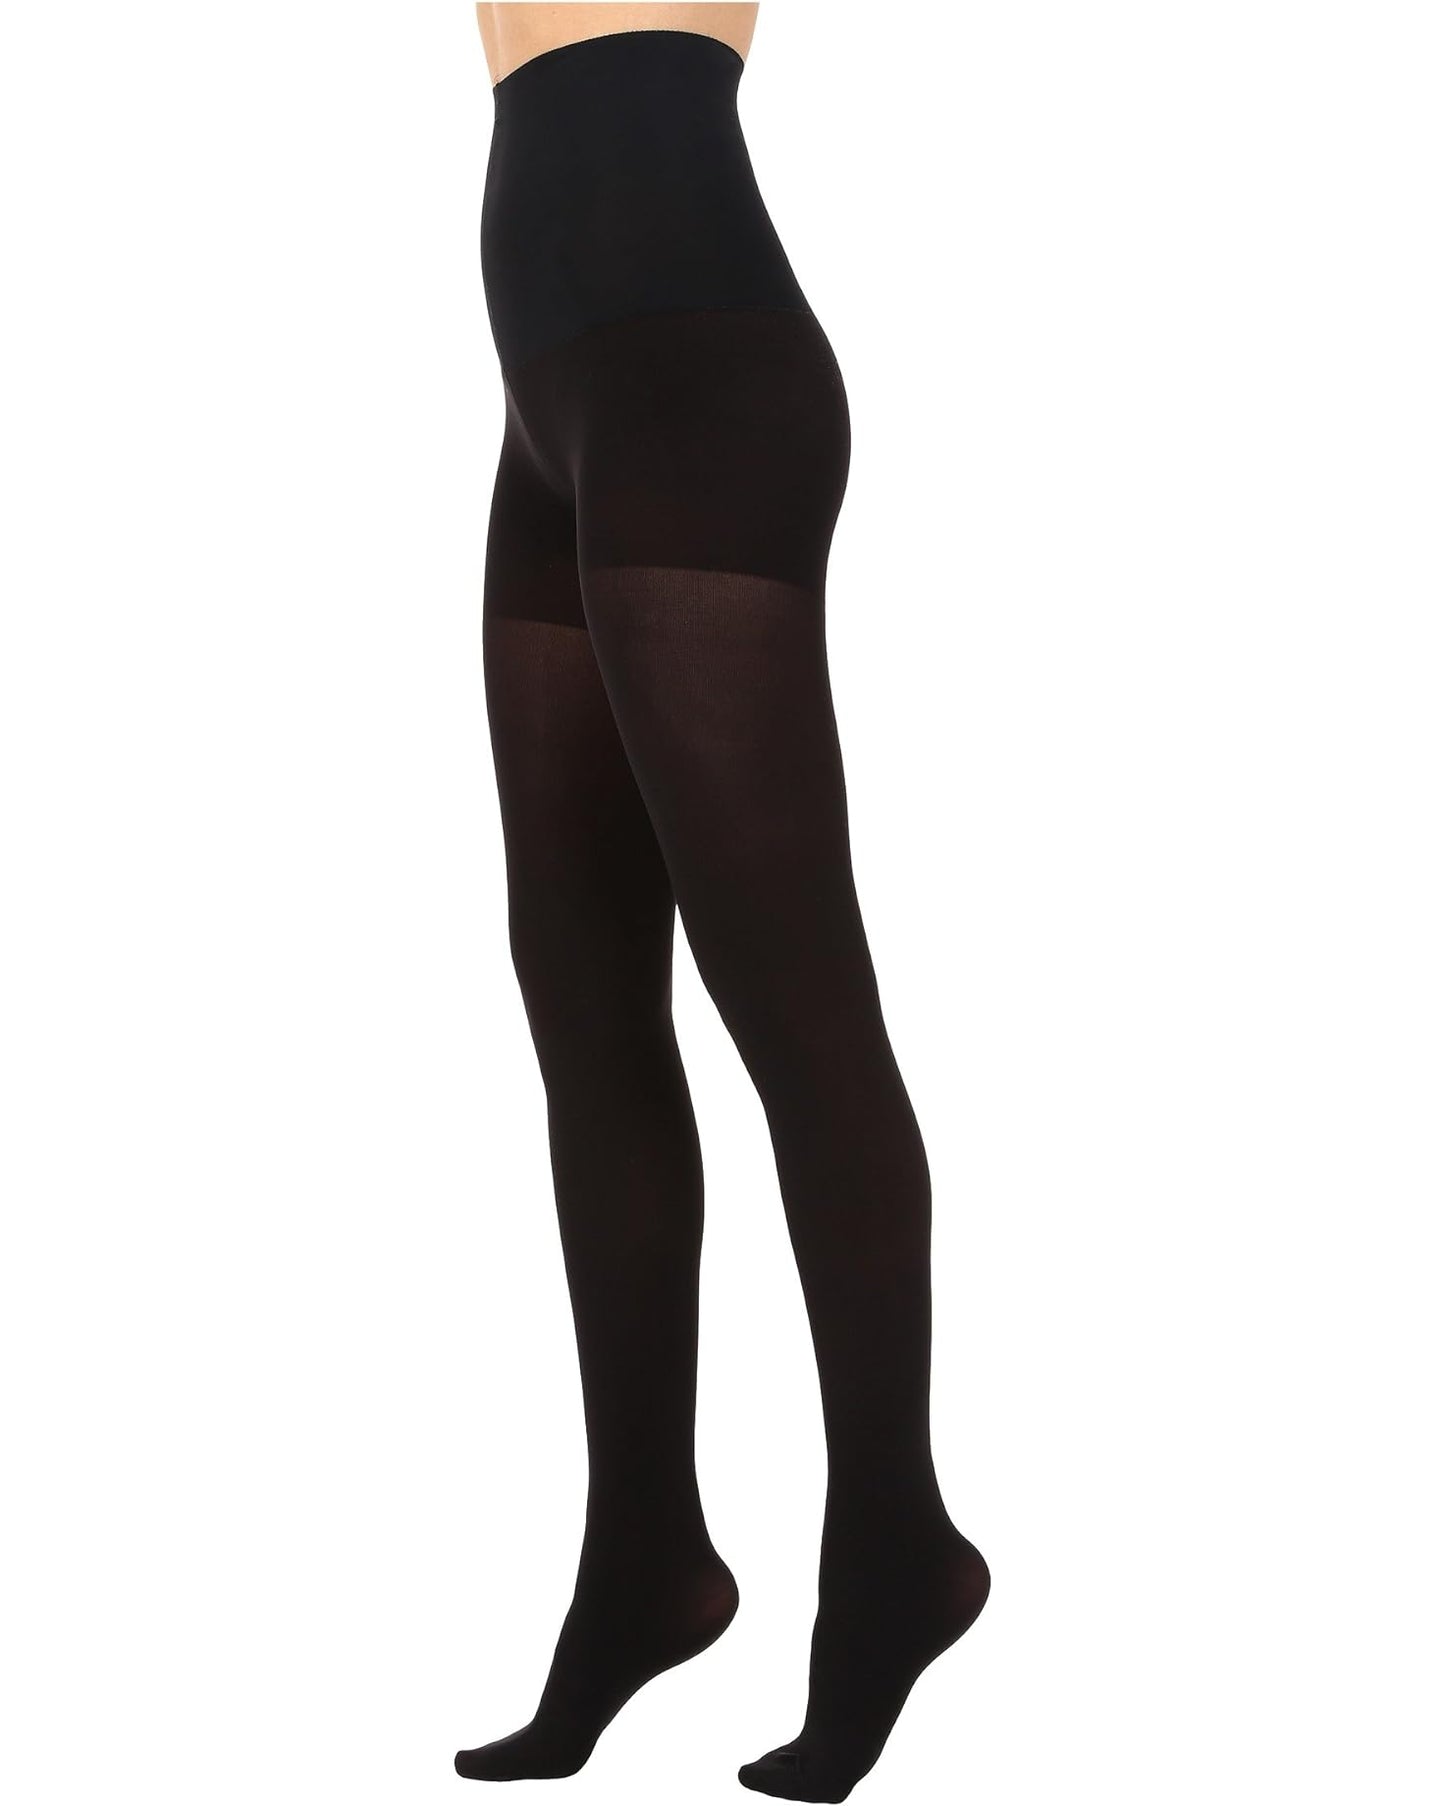 Model wearing Commando Ultimate Opaque Control tights in black on a white background